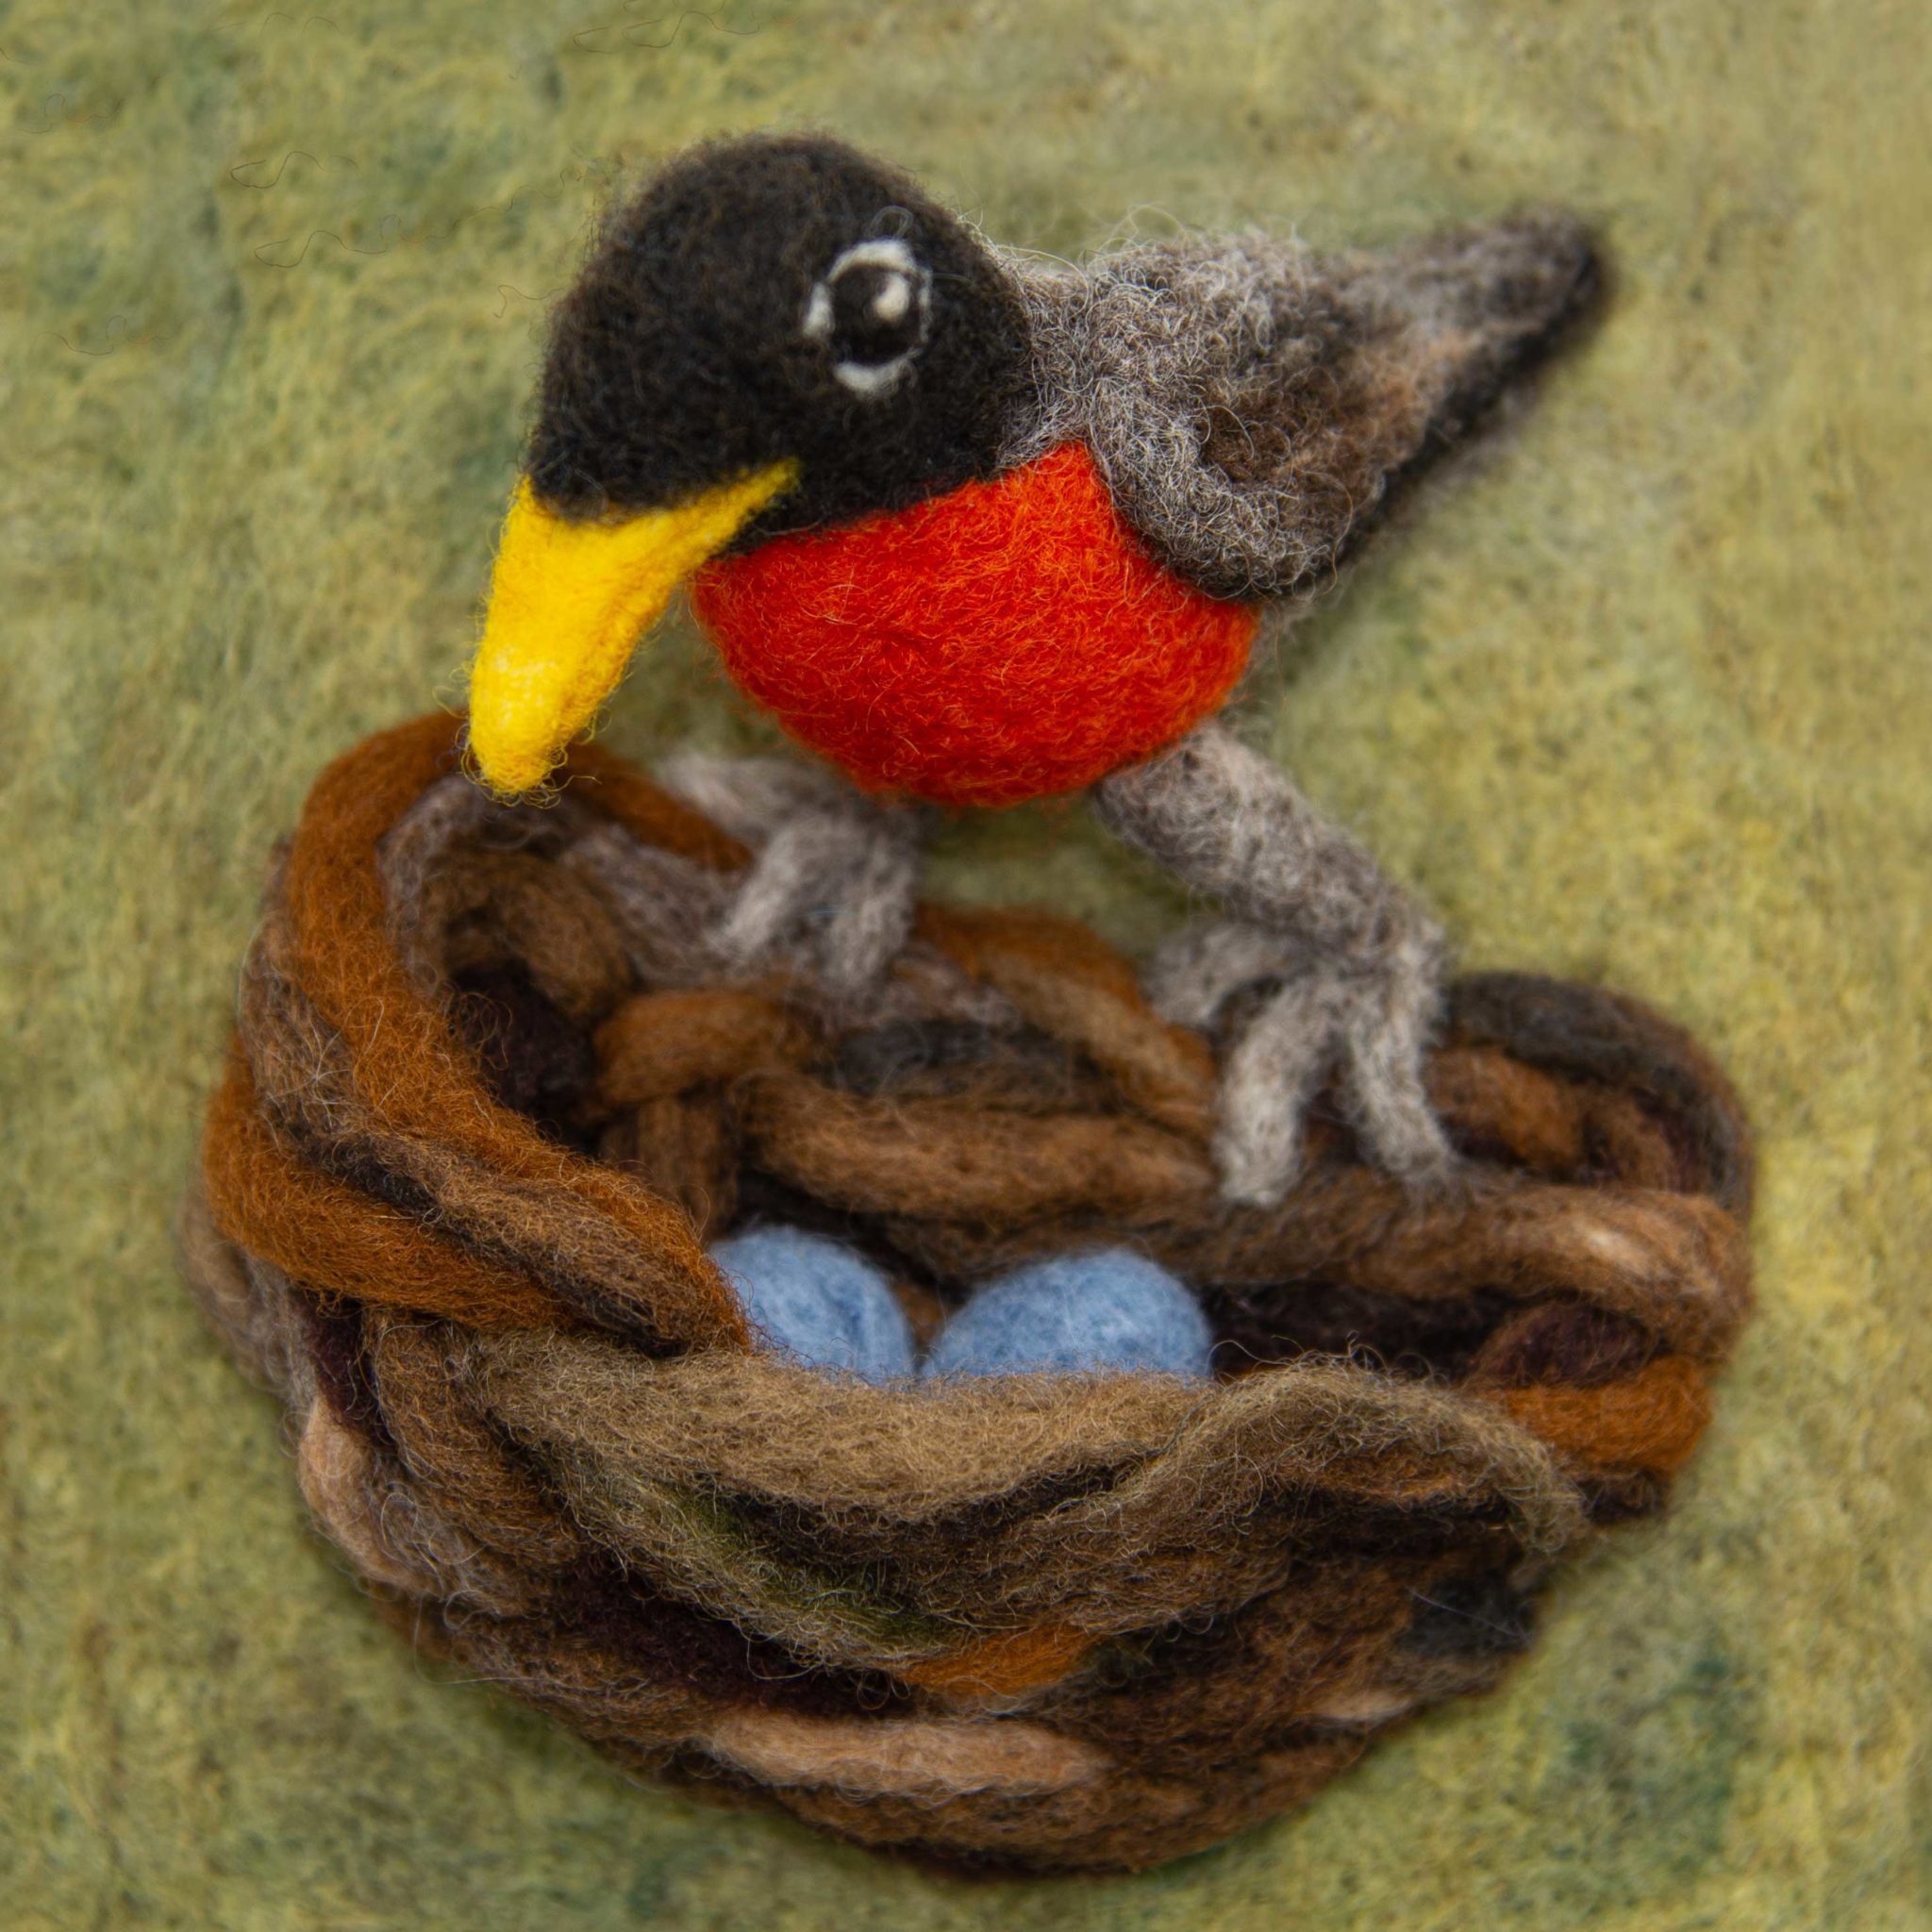 Nest - Needle Felted Illustration for Hillary Dow's ABC picture book